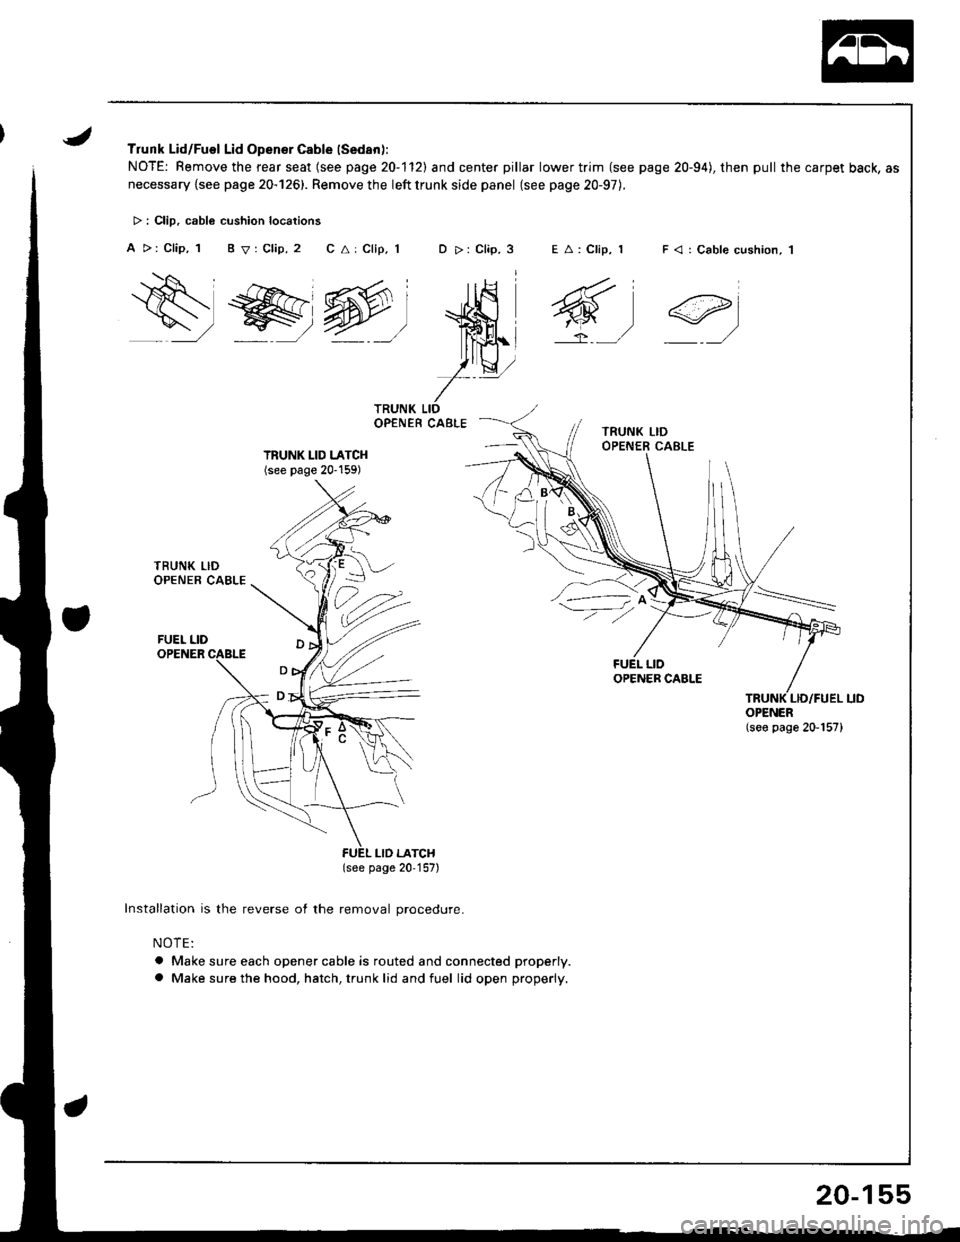 HONDA INTEGRA 1998 4.G User Guide Trunk Lid/Fuel Lid Opener Cable (Sedan):
NOTE: Remove the rear seat (see page 20-1l2l and center pillar lower trim (see page 20-94), then pull the carpet back, as
necessary {see page 20-126). Remove 